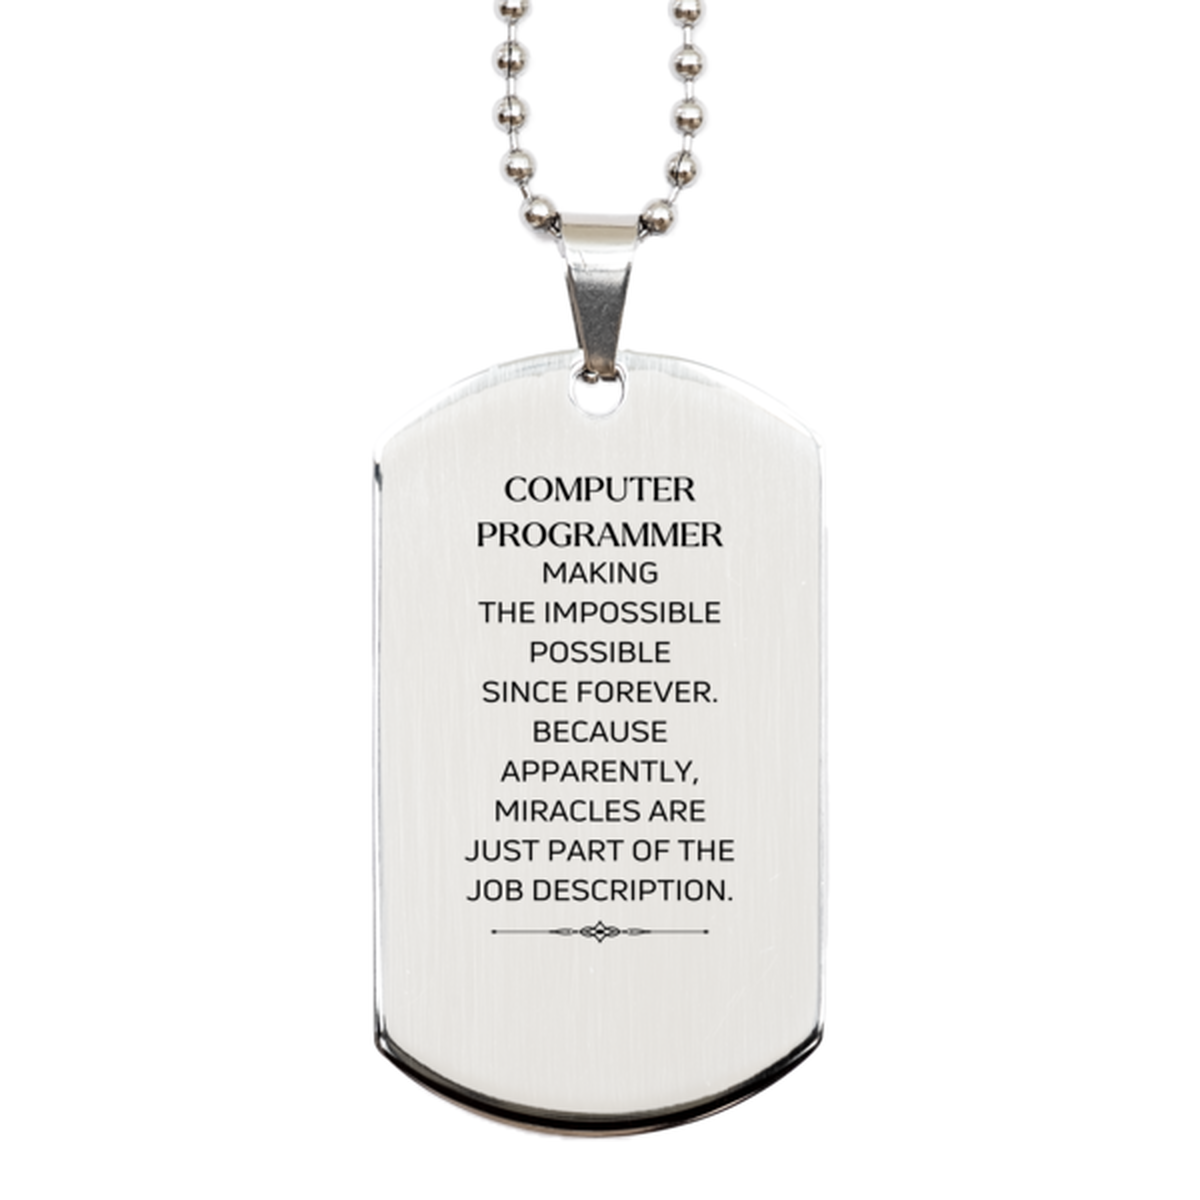 Funny Computer Programmer Gifts, Miracles are just part of the job description, Inspirational Birthday Silver Dog Tag For Computer Programmer, Men, Women, Coworkers, Friends, Boss